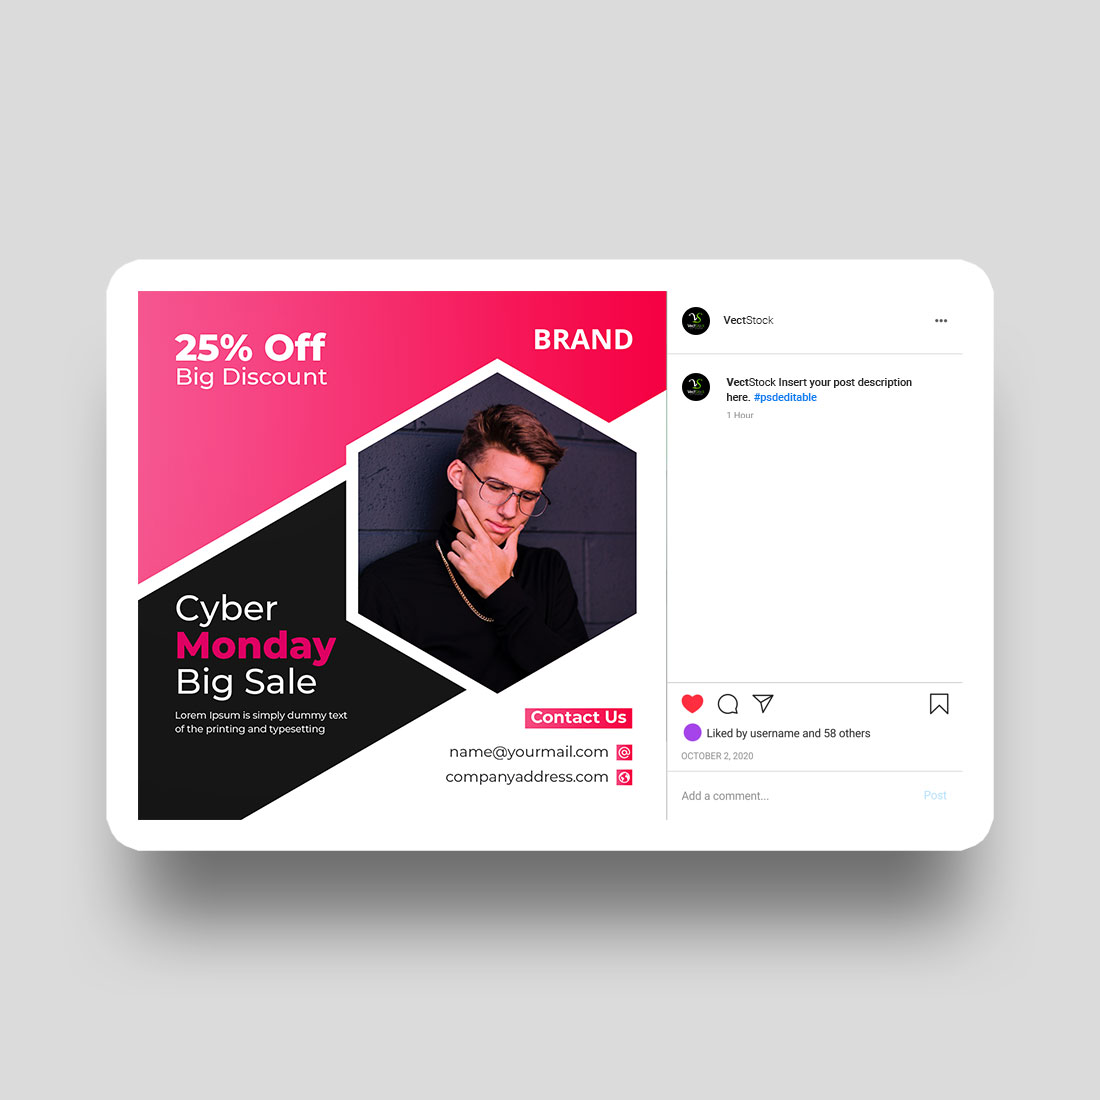 Cyber Monday big sale social media Instagram post and banner template design preview image.